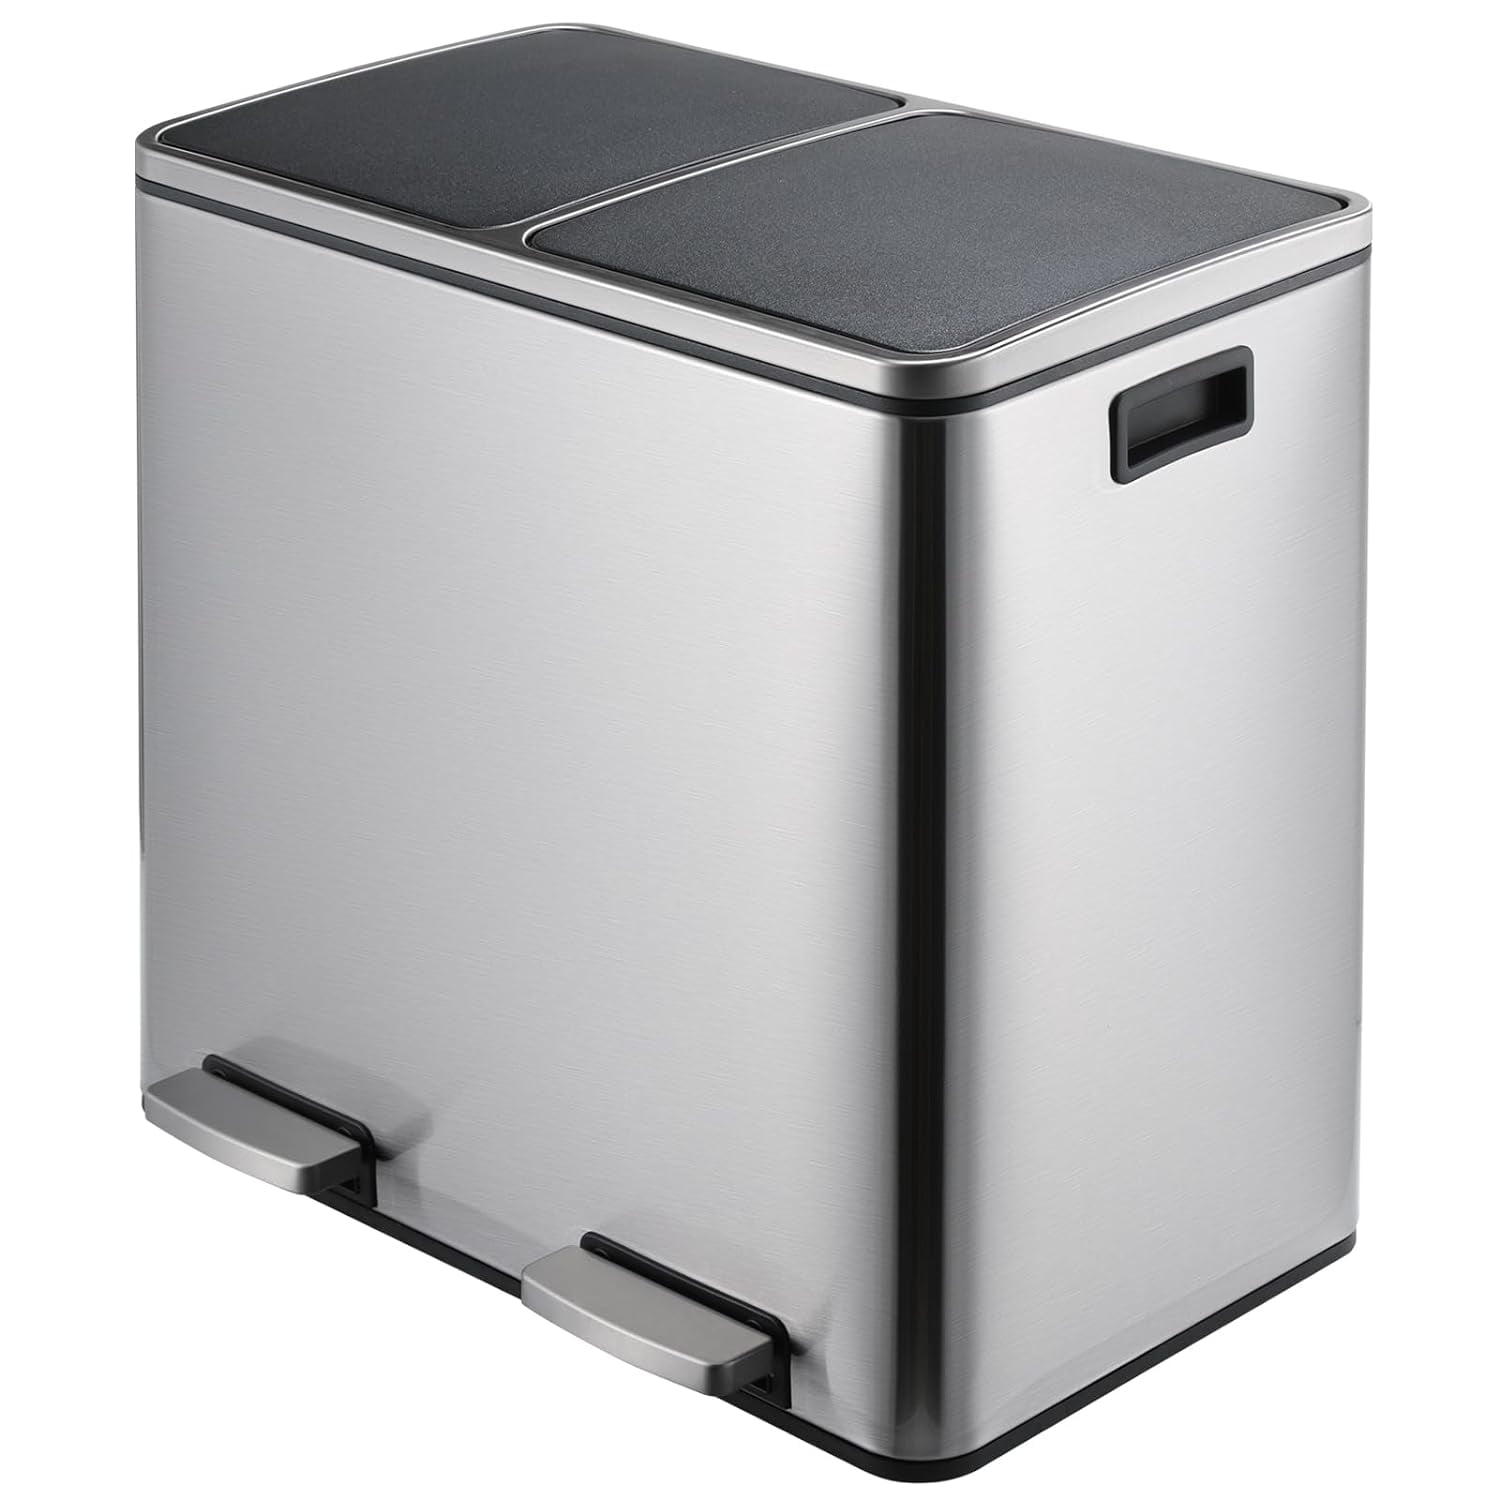 Arlopu 12 Gallon Dual Compartment Trash Can, Stainless Steel Kitchen ...